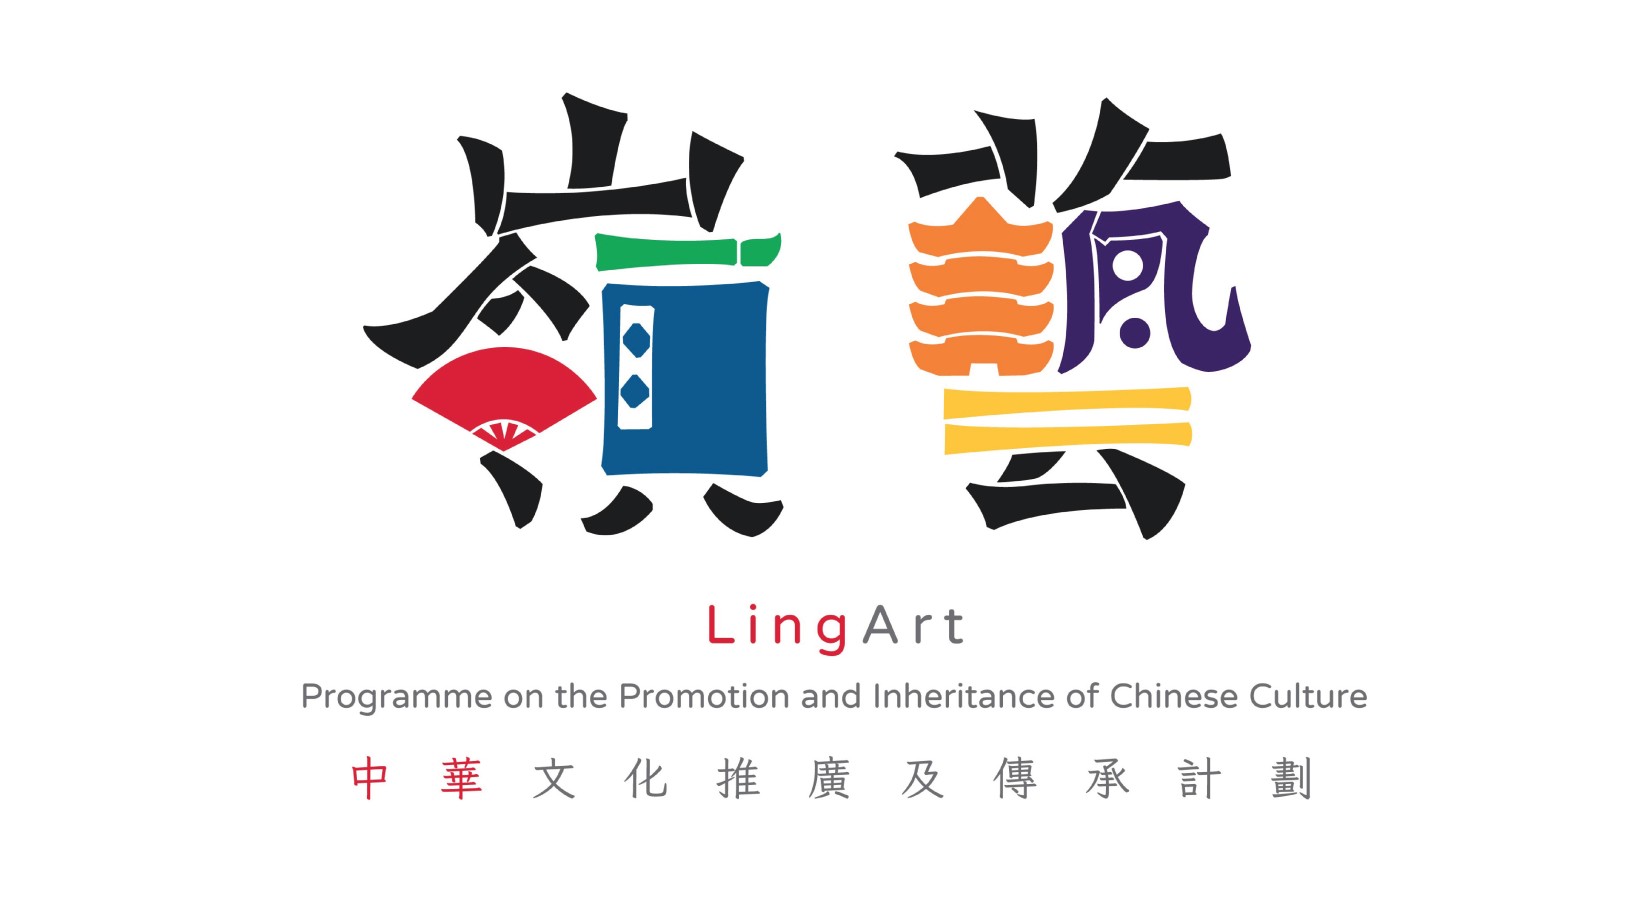 LingArt Programme on the Promotion and Inheritance of Chinese Culture